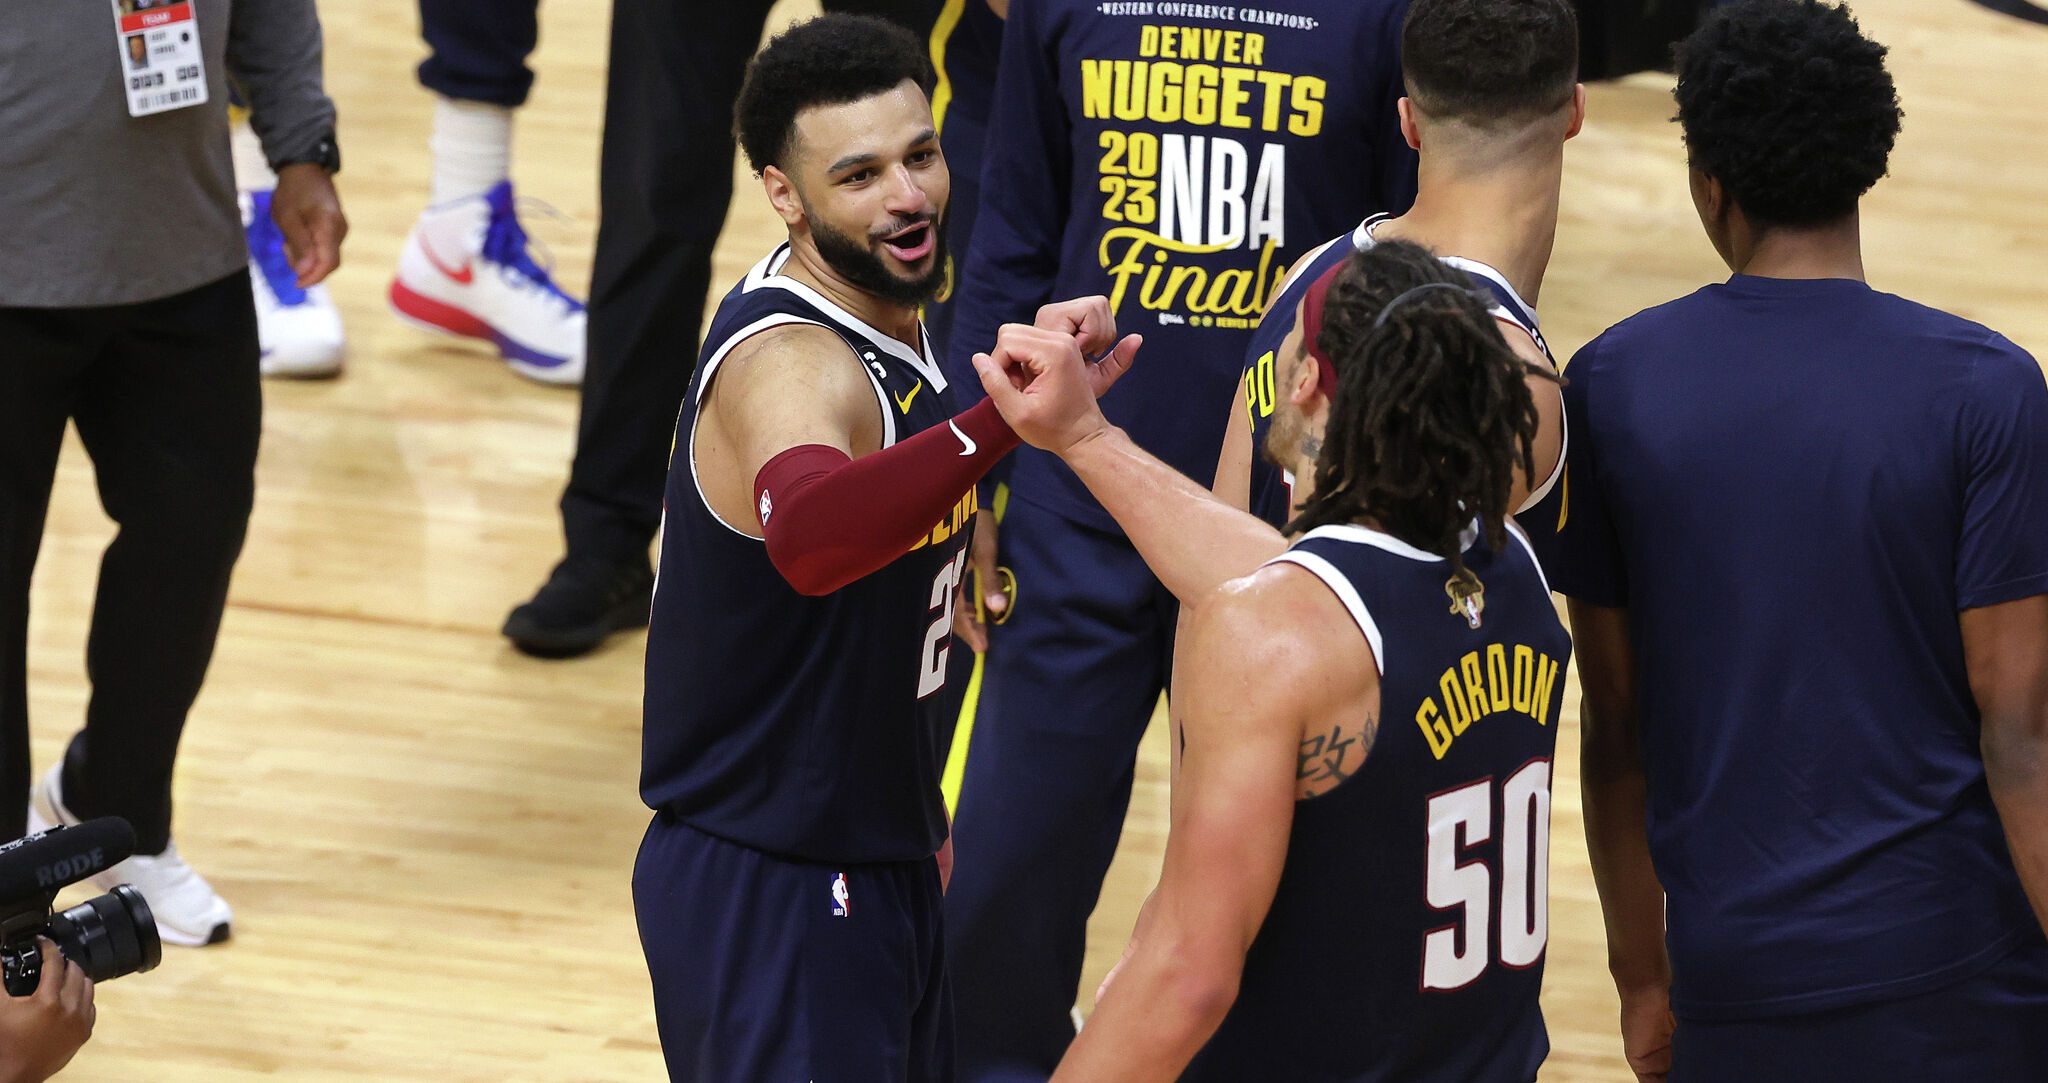 Nuggets now in full command of NBA Finals, top Heat 108-95 for 3-1